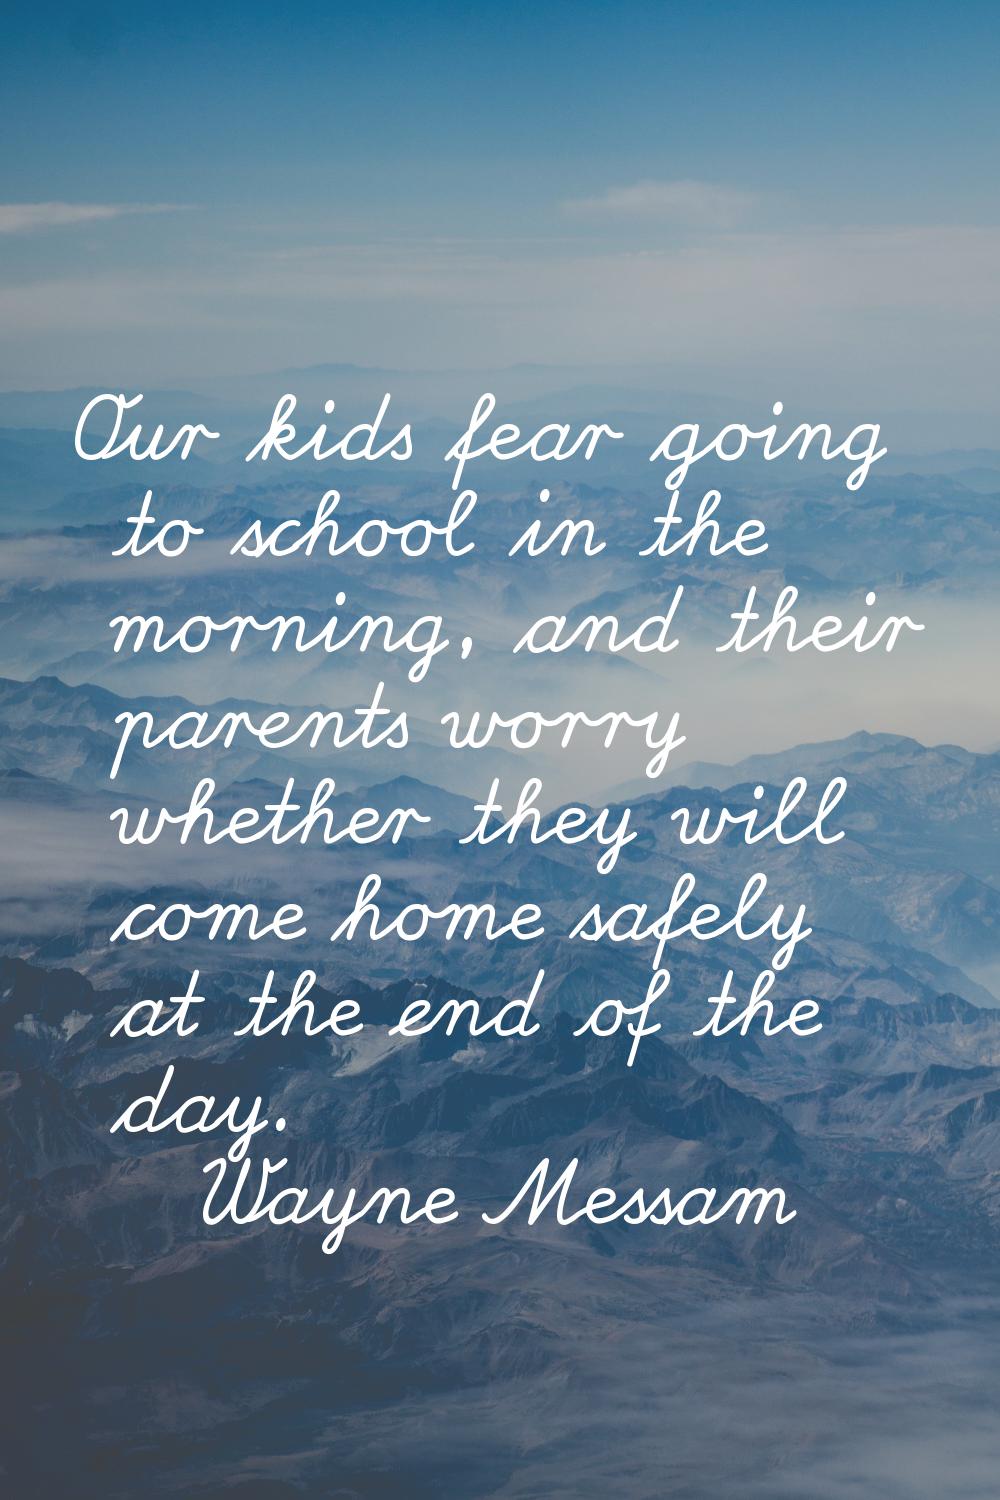 Our kids fear going to school in the morning, and their parents worry whether they will come home s